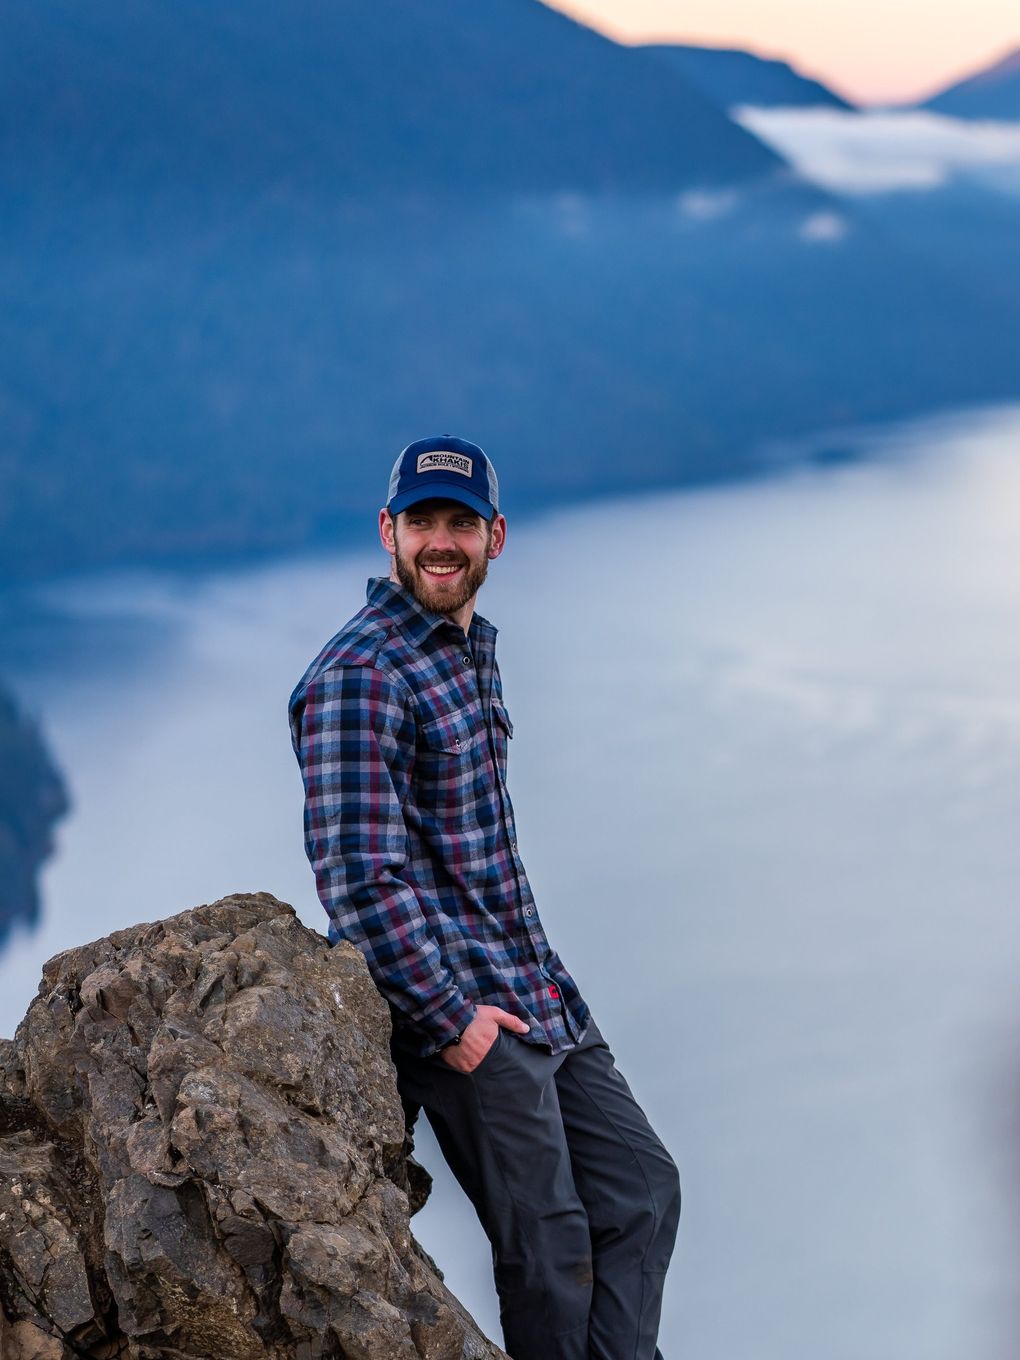 Tommy Farris, founder of the Olympic Hiking Co., said his company was busier than ever this summer as the pandemic spurred many to go on socially distanced hikes and outdoor tours. (Josh Steele)